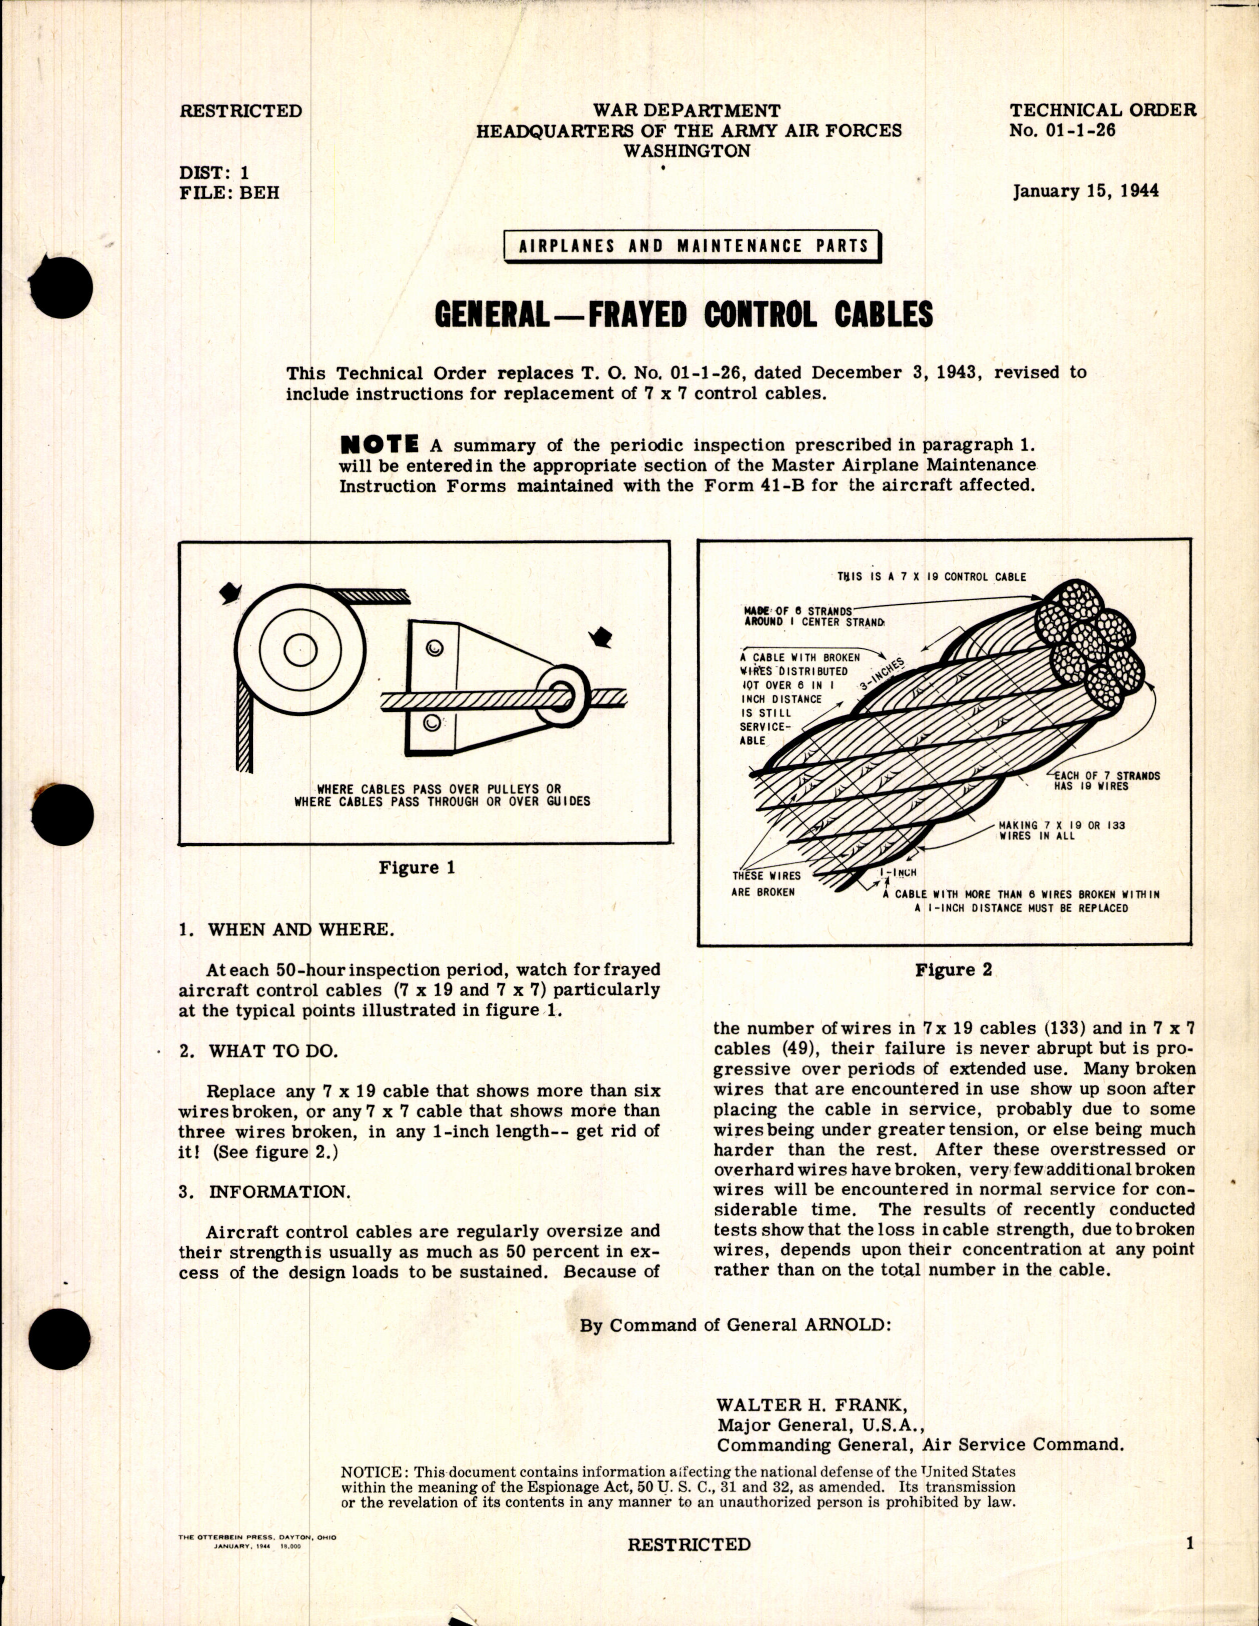 Sample page 1 from AirCorps Library document: Airplanes and Maintenance Parts for Frayed Control Cables